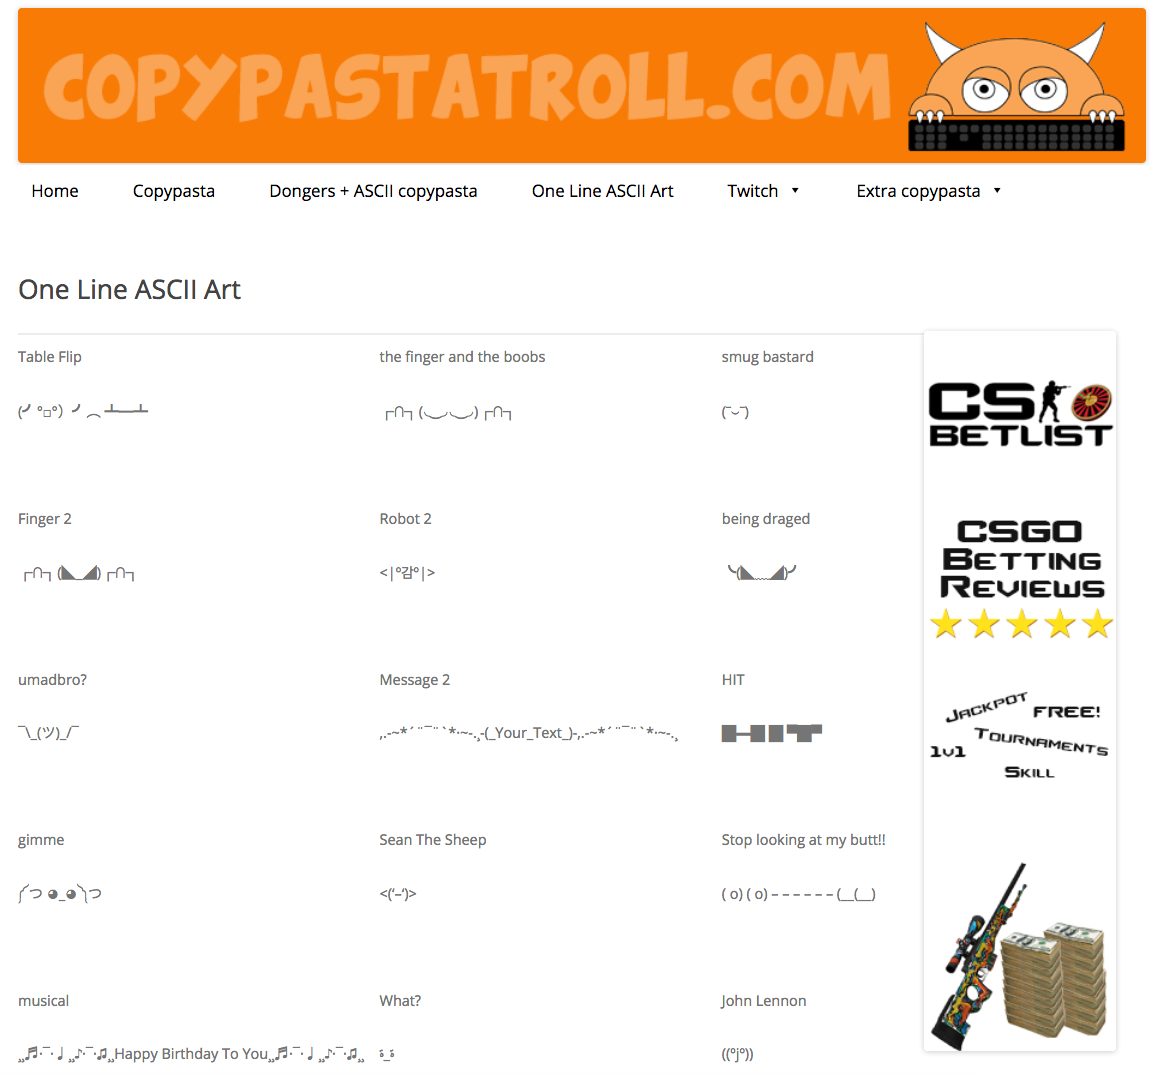 copypastatroll.com - click to launch in a new window